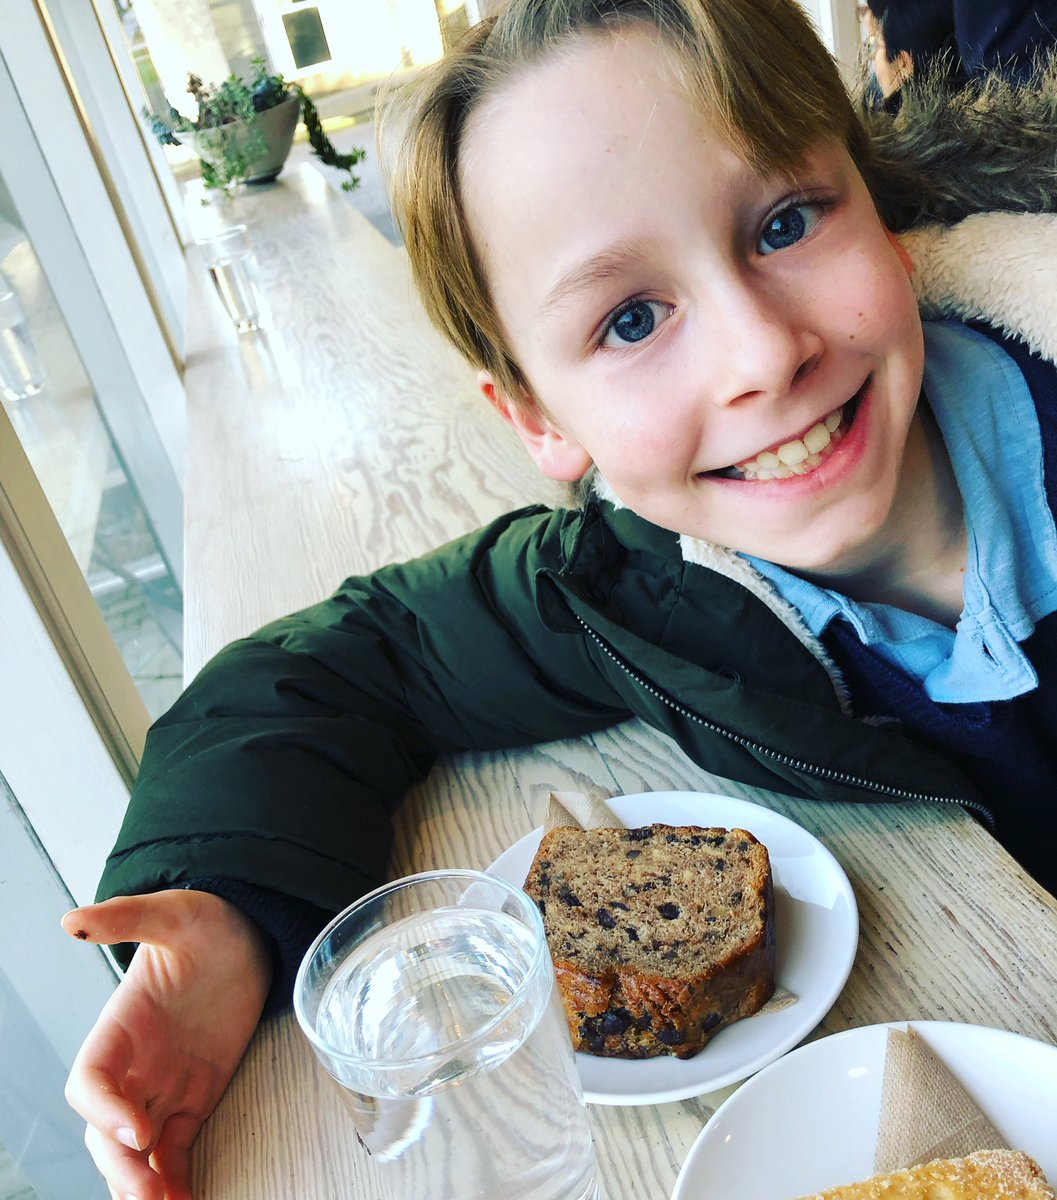 Pre-audition treat! 🥮 
.   .   .
Comment below on your favourite go-to snack!
.
.
.
.
.
#snacktime #bananabread #shortbread #hotchocolate #pastries #sofresh #yummy #myfuel #audition #callback #pilotseason #commercial #tv #busyboy #kidactor #actorslife #ilovemyjob